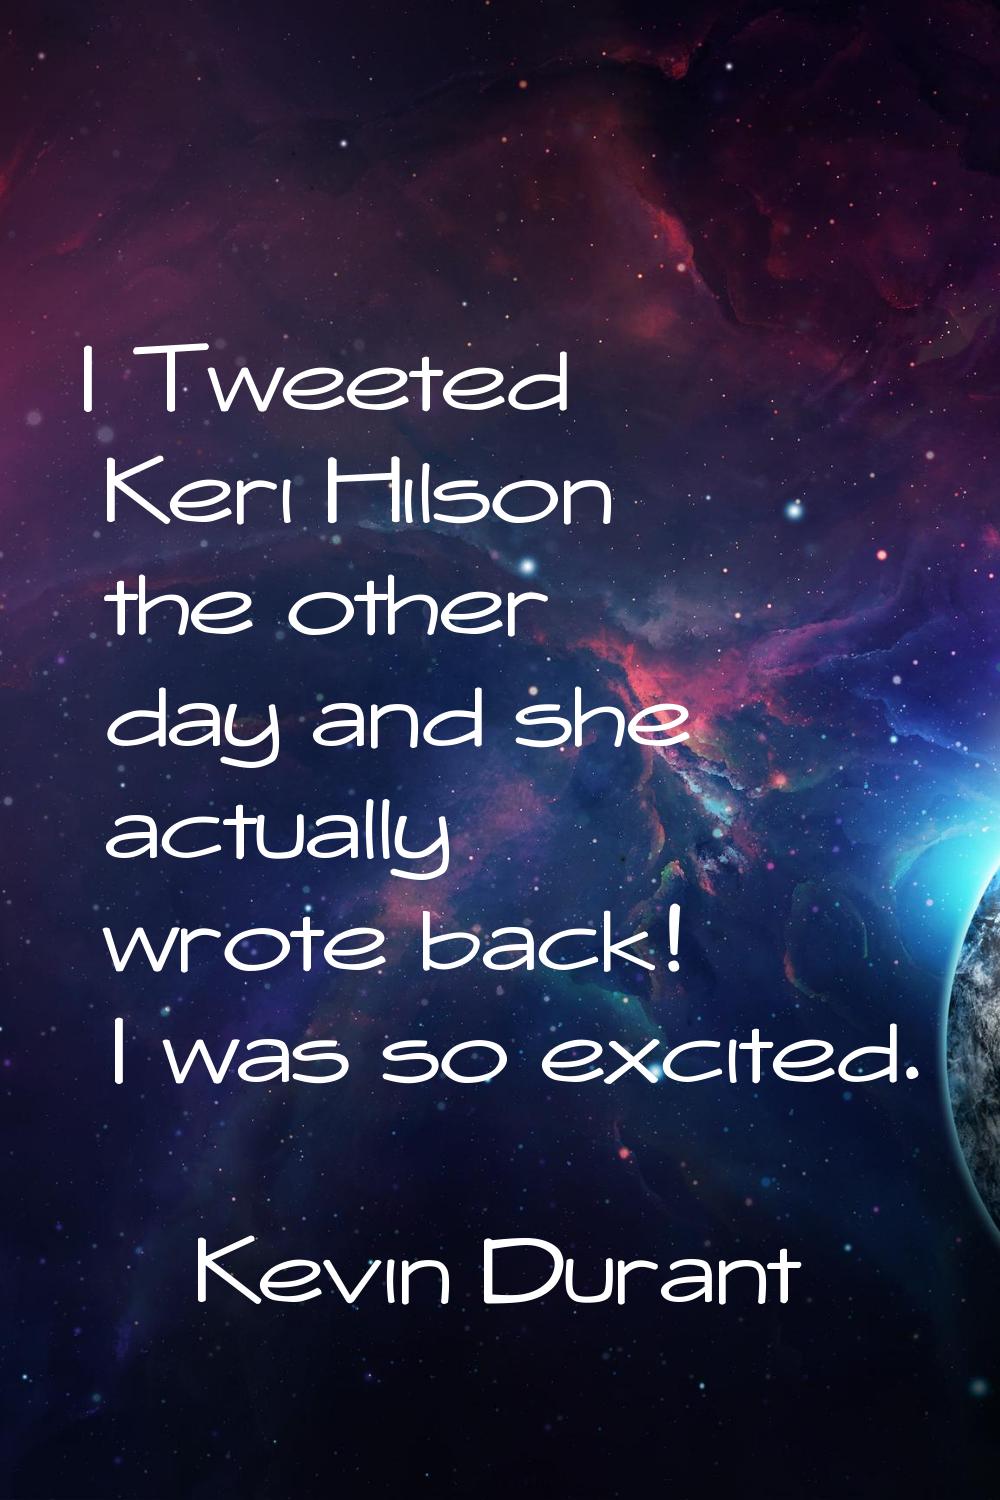 I Tweeted Keri Hilson the other day and she actually wrote back! I was so excited.